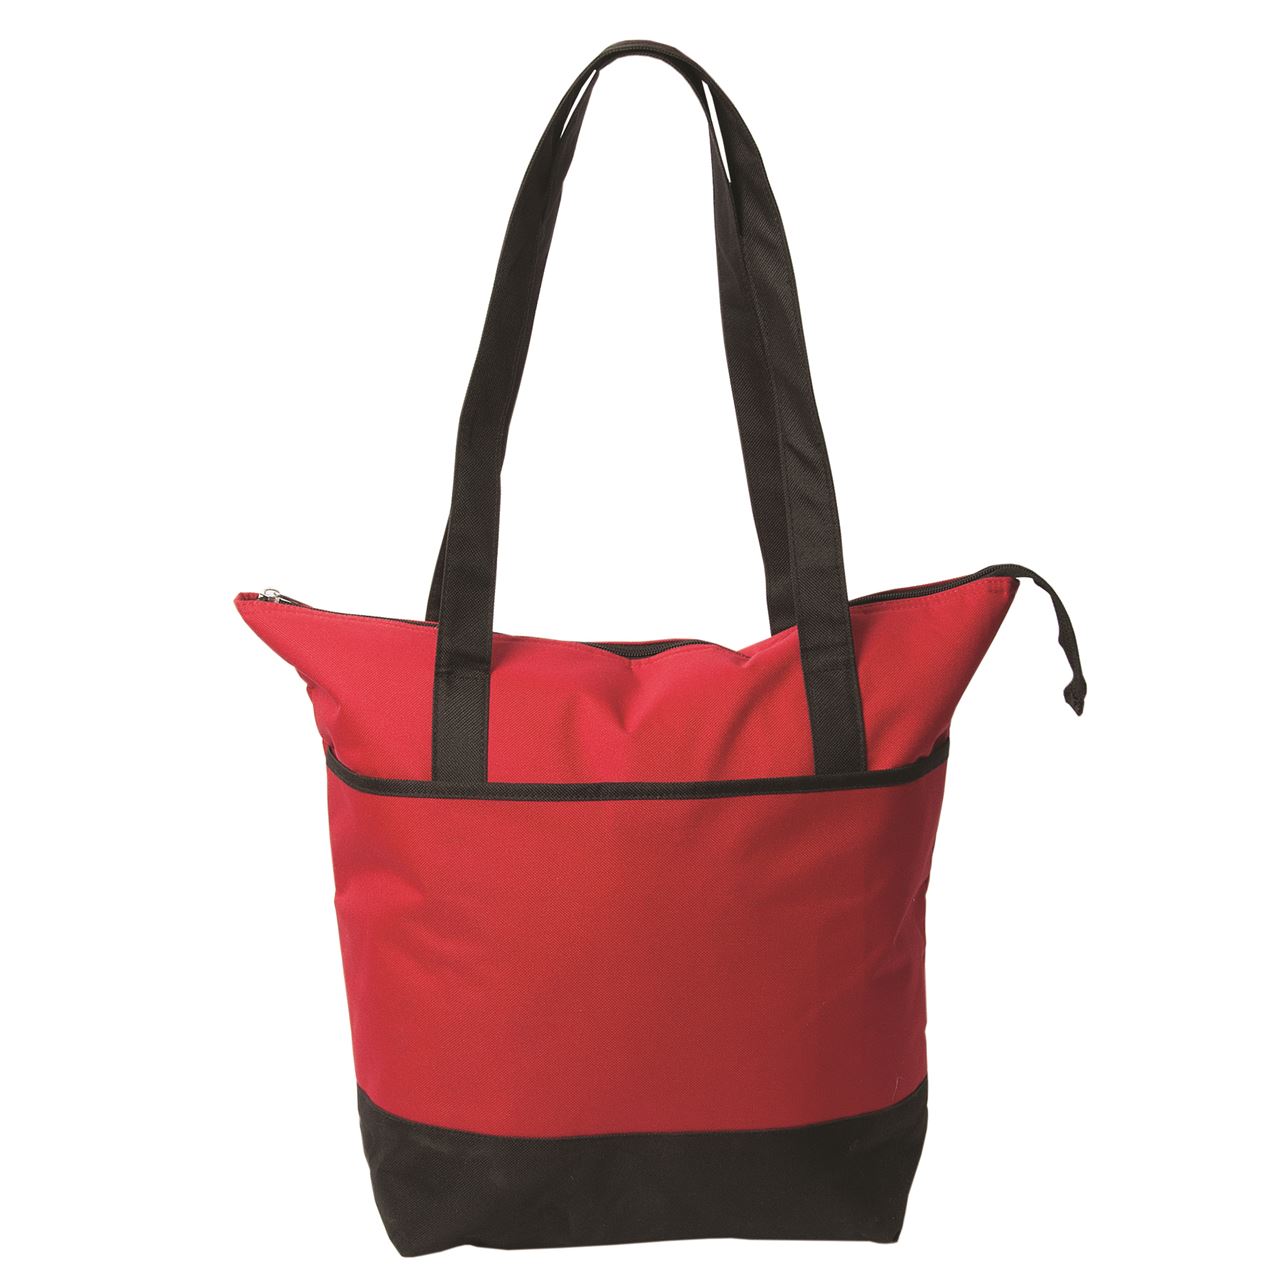 Picture of Carry Cold Cooler Tote (17.75” W x 15” H x 7” D)